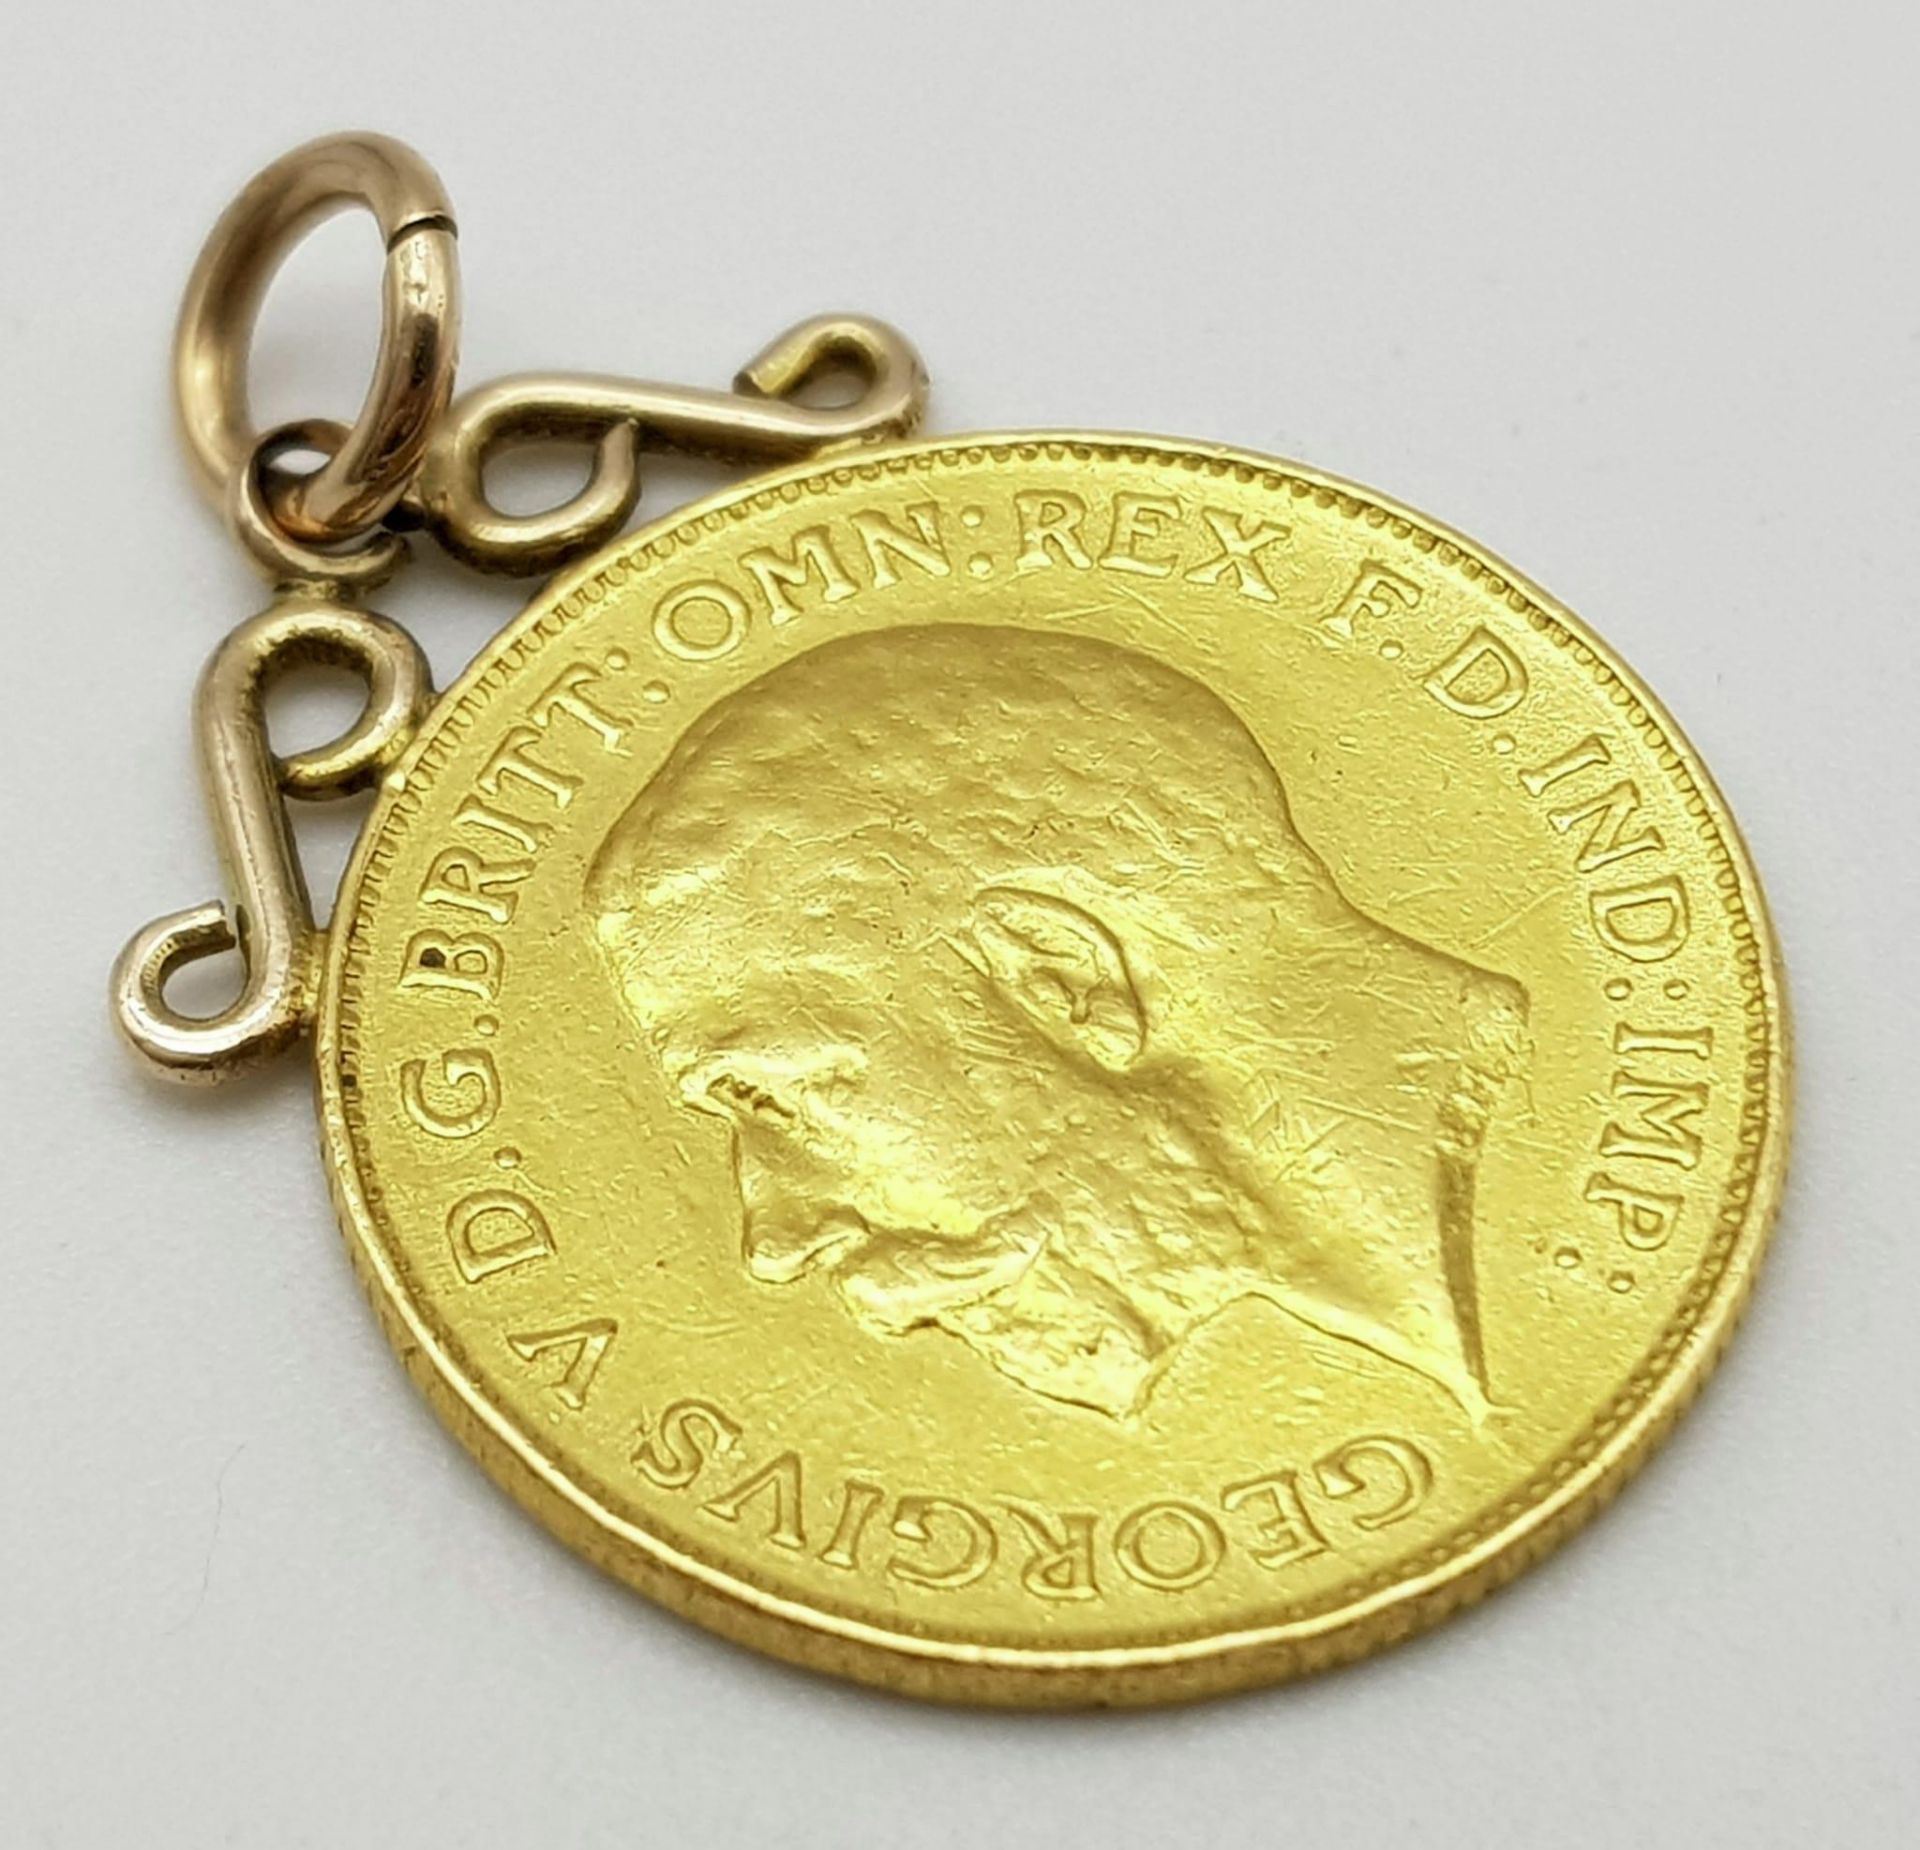 A 1912 King George V half sovereign pendant, total weight: 4.4 g - Image 2 of 4